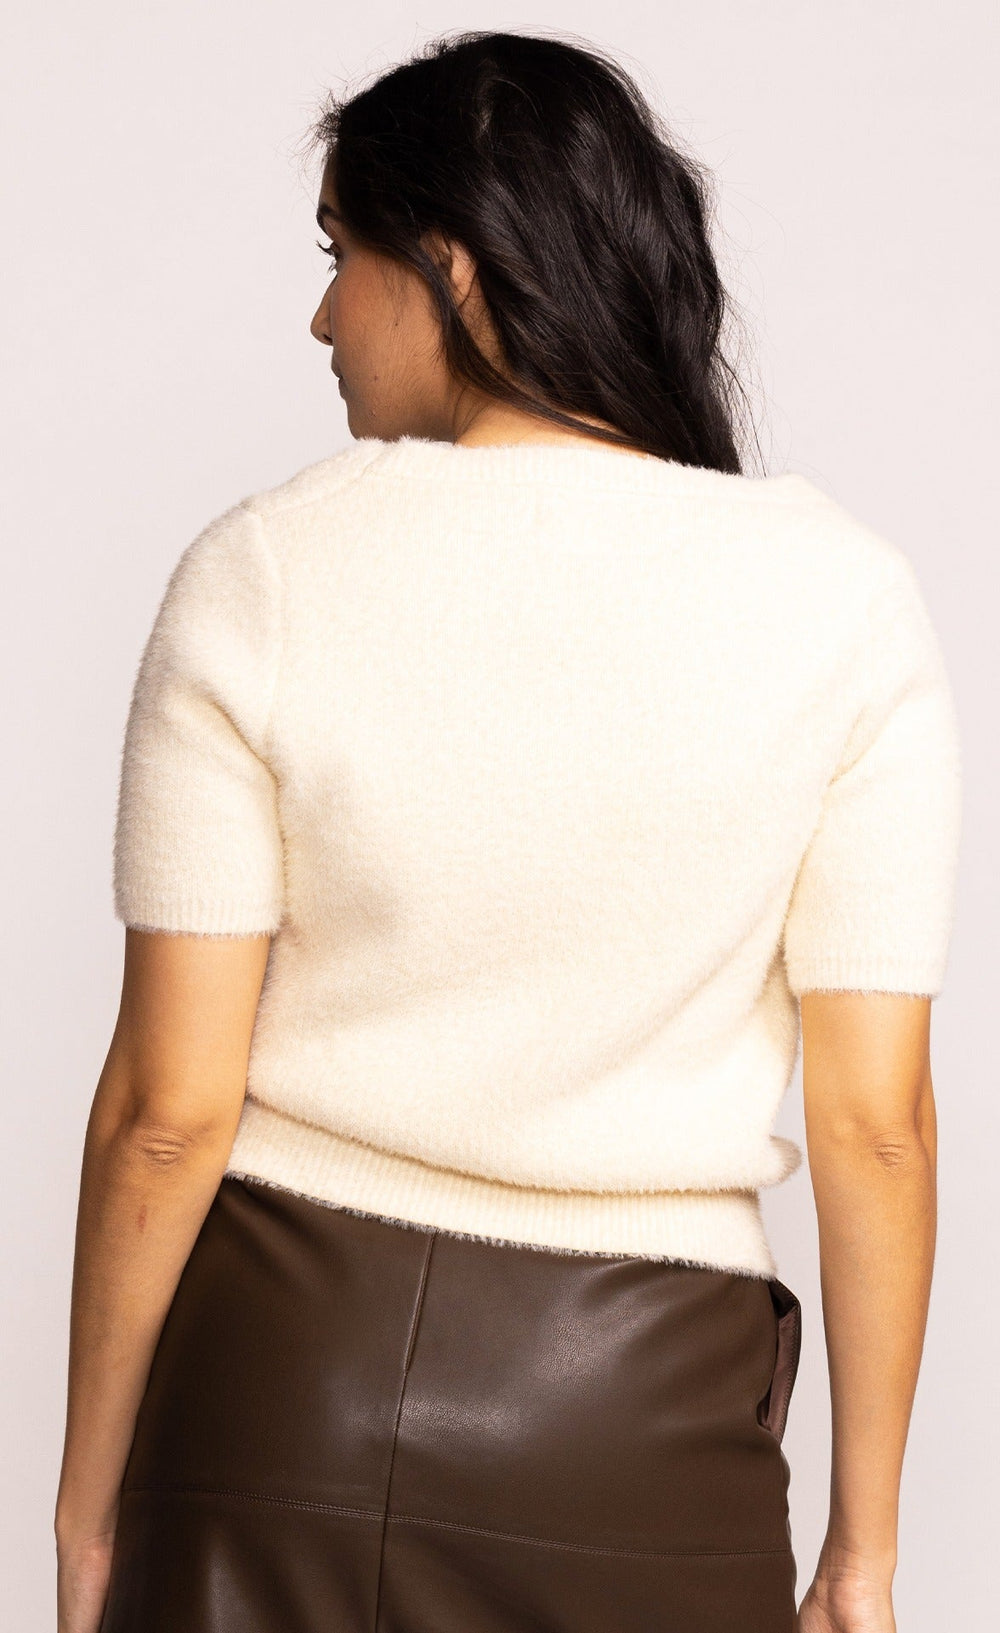 White addison sweater by pink martini. Fall23. Jolie folie boutique